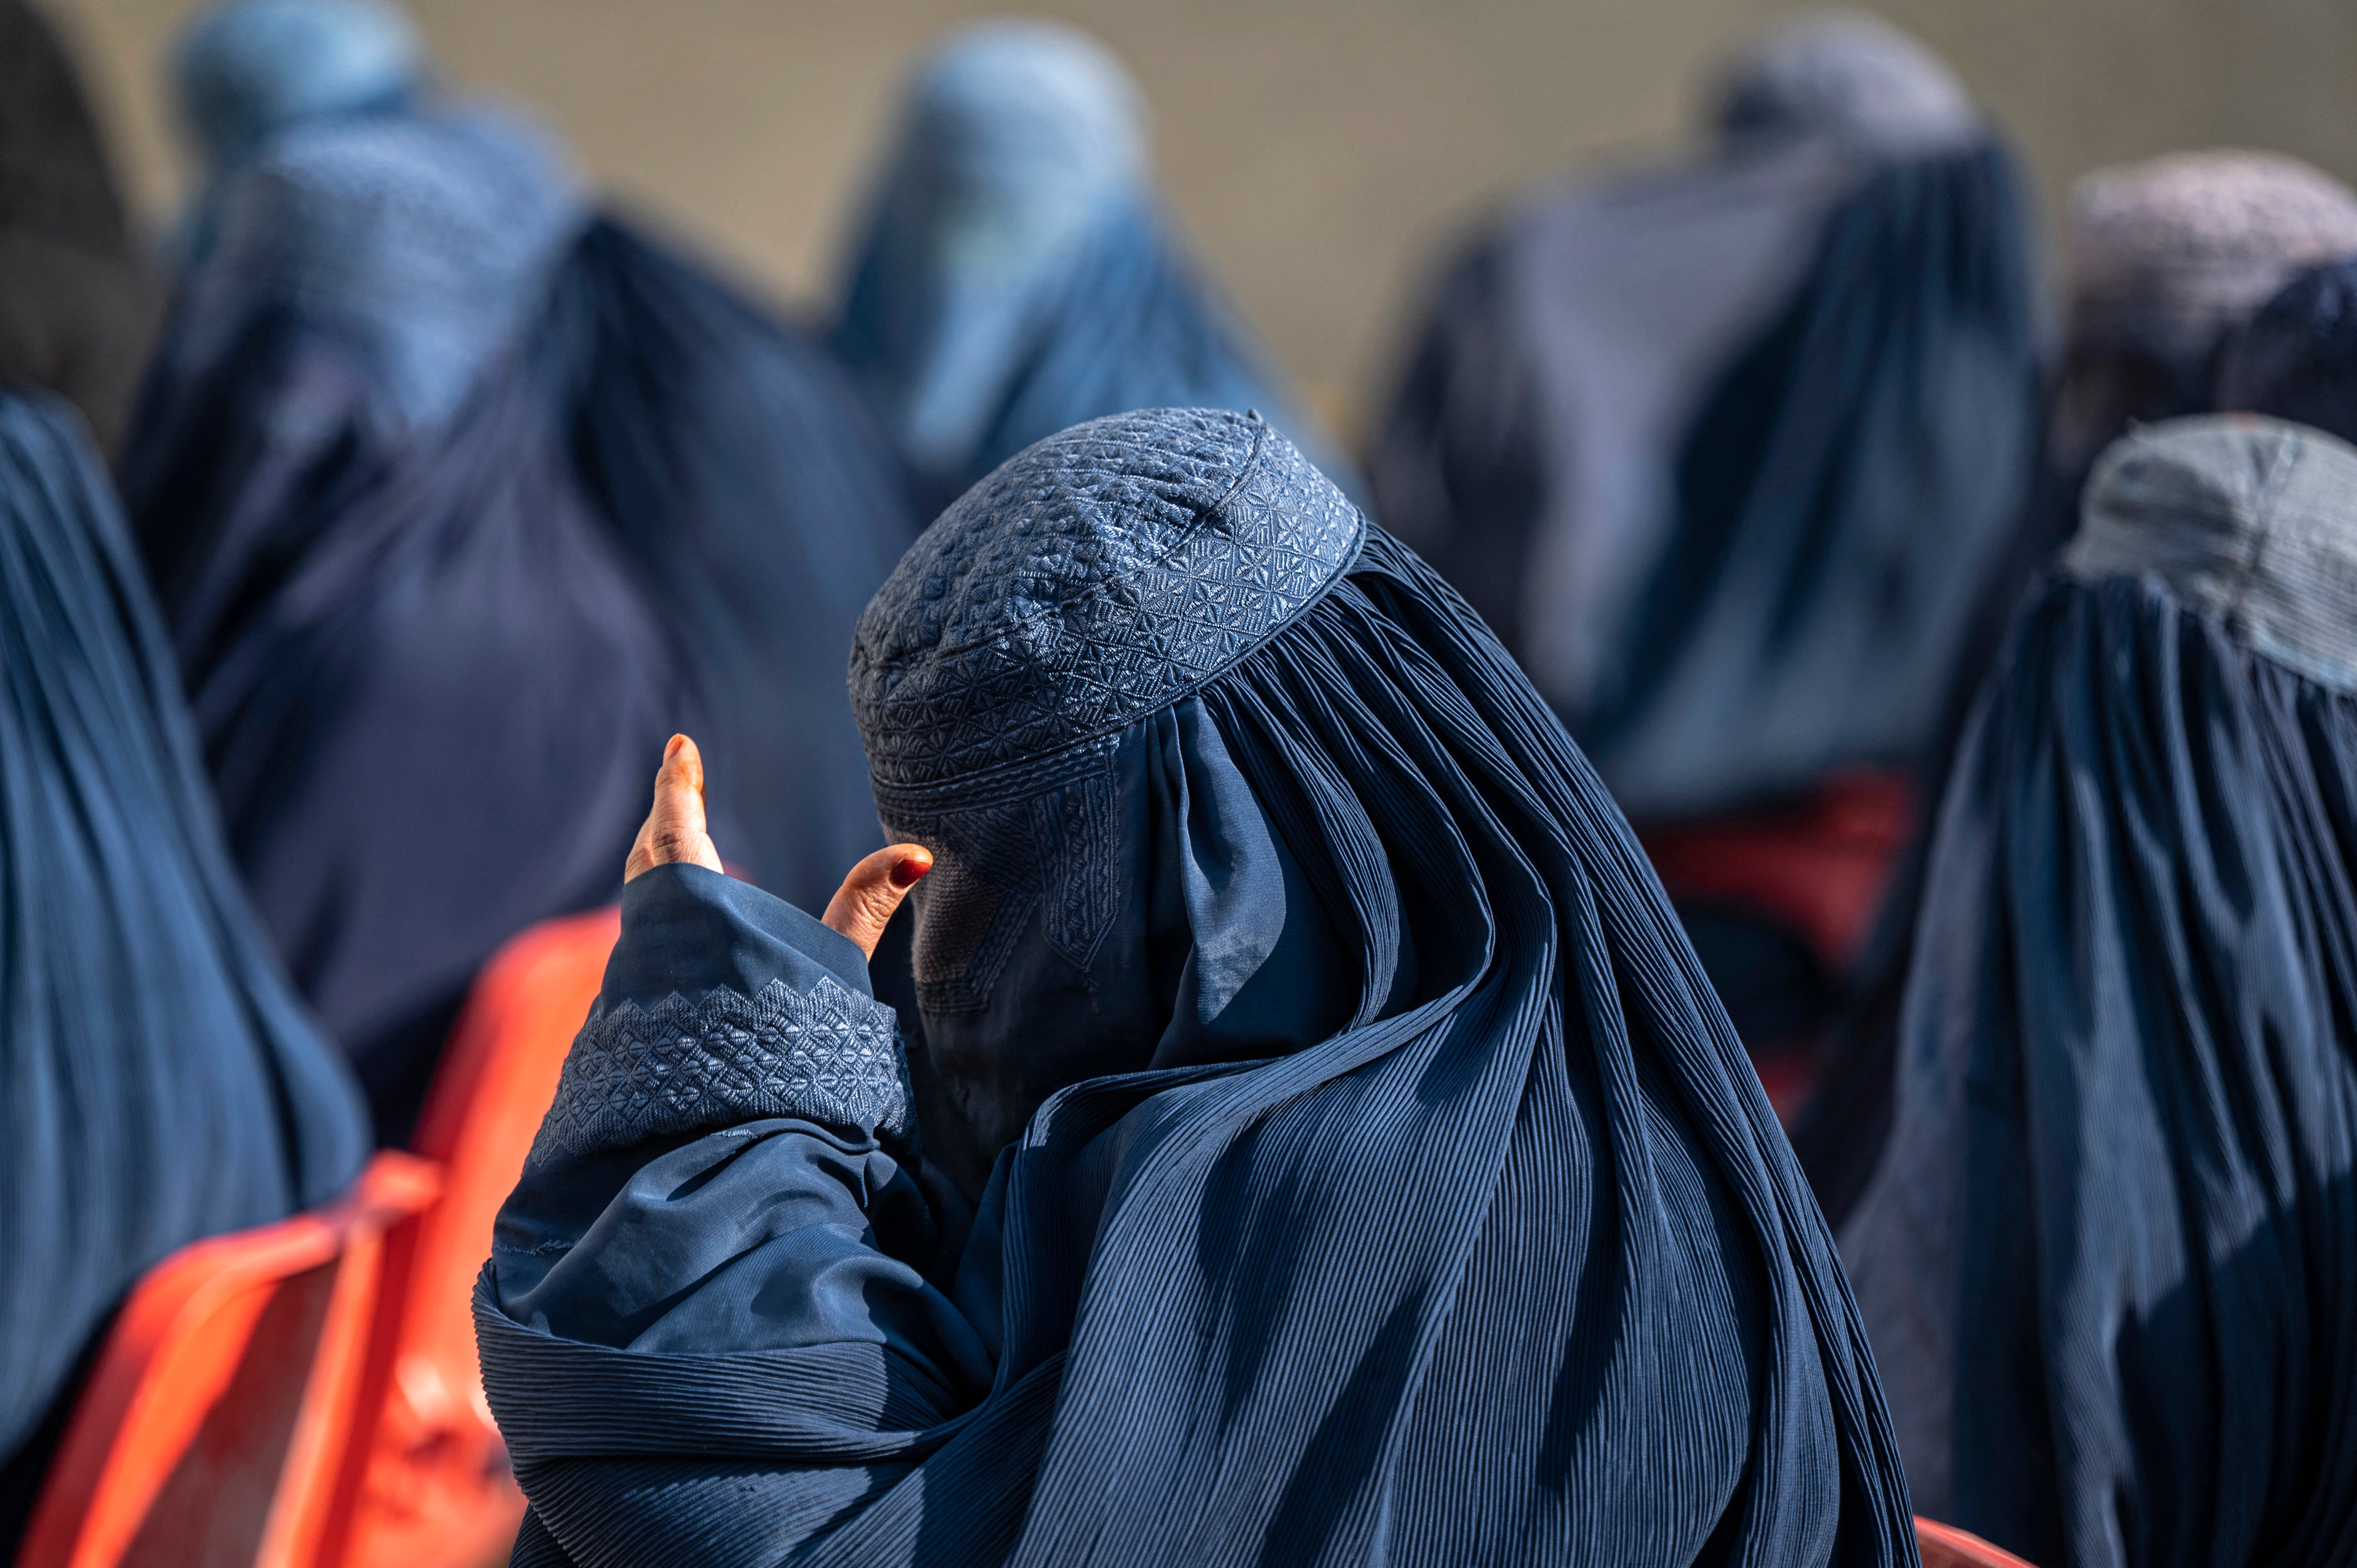 Afghan burqa-clad women sit as they wait to receive cash money in Pul-i-Alam